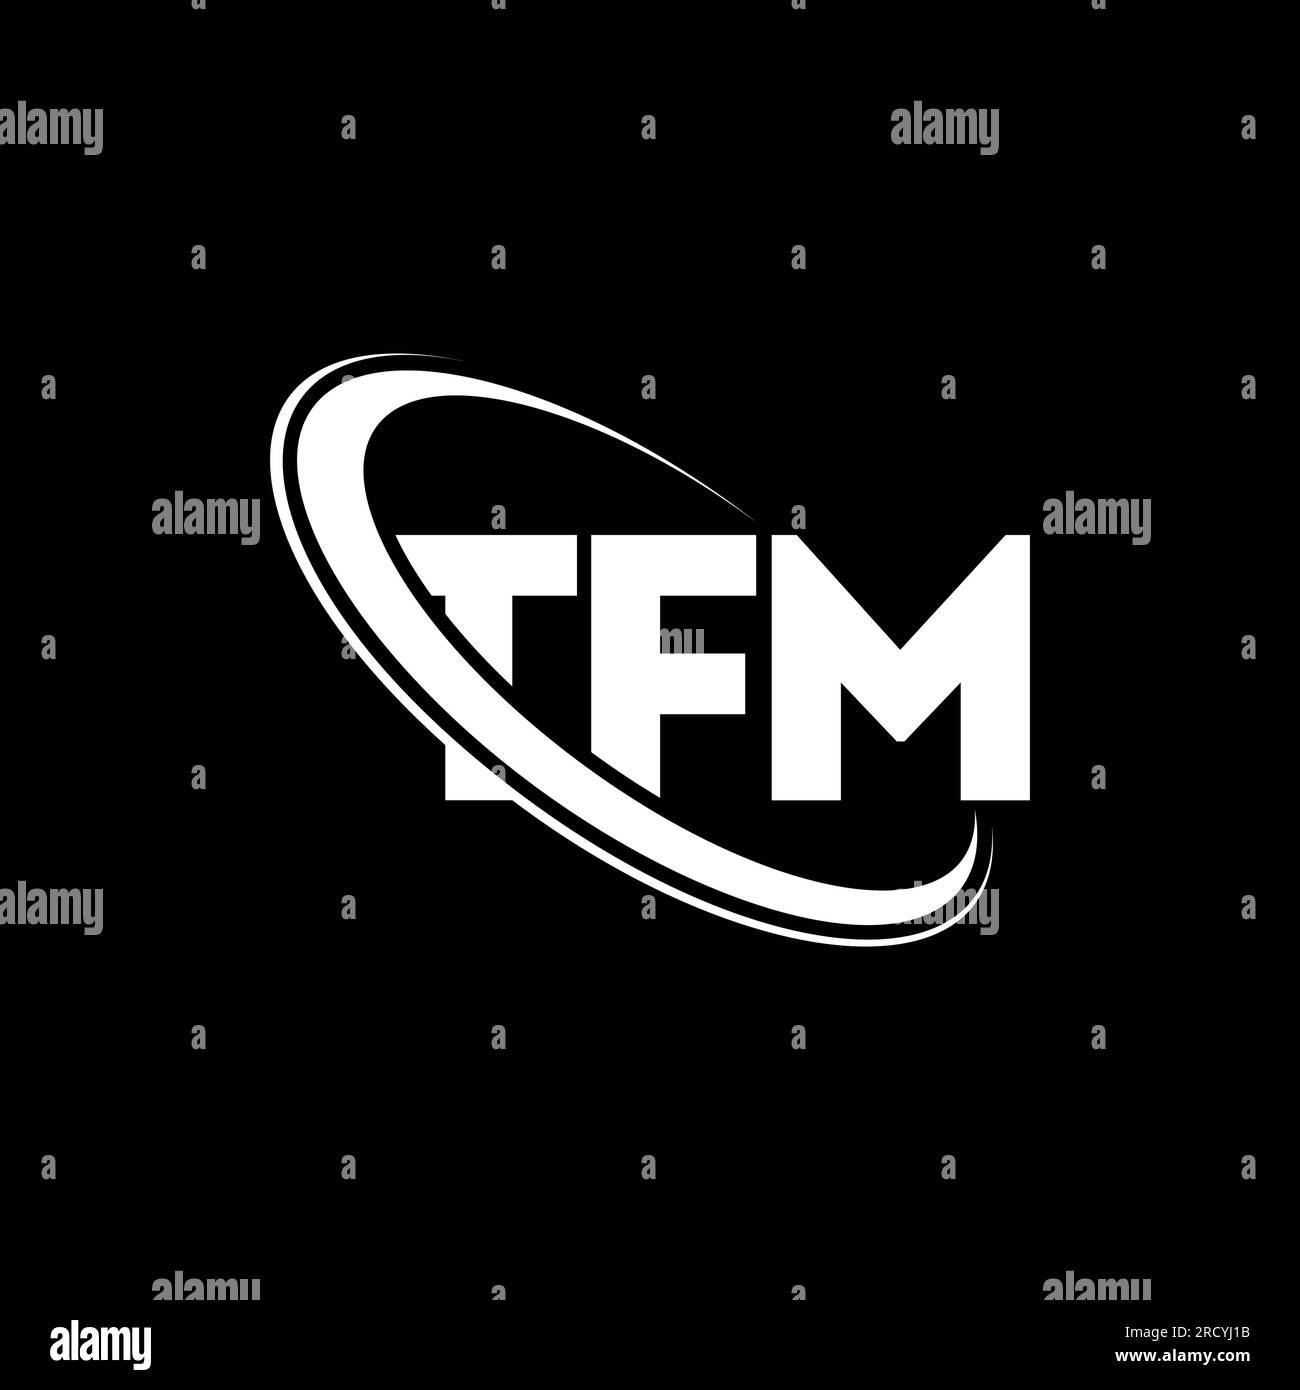 TFM logo. TFM letter. TFM letter logo design. Initials TFM logo linked with circle and uppercase monogram logo. TFM typography for technology, busines Stock Vector